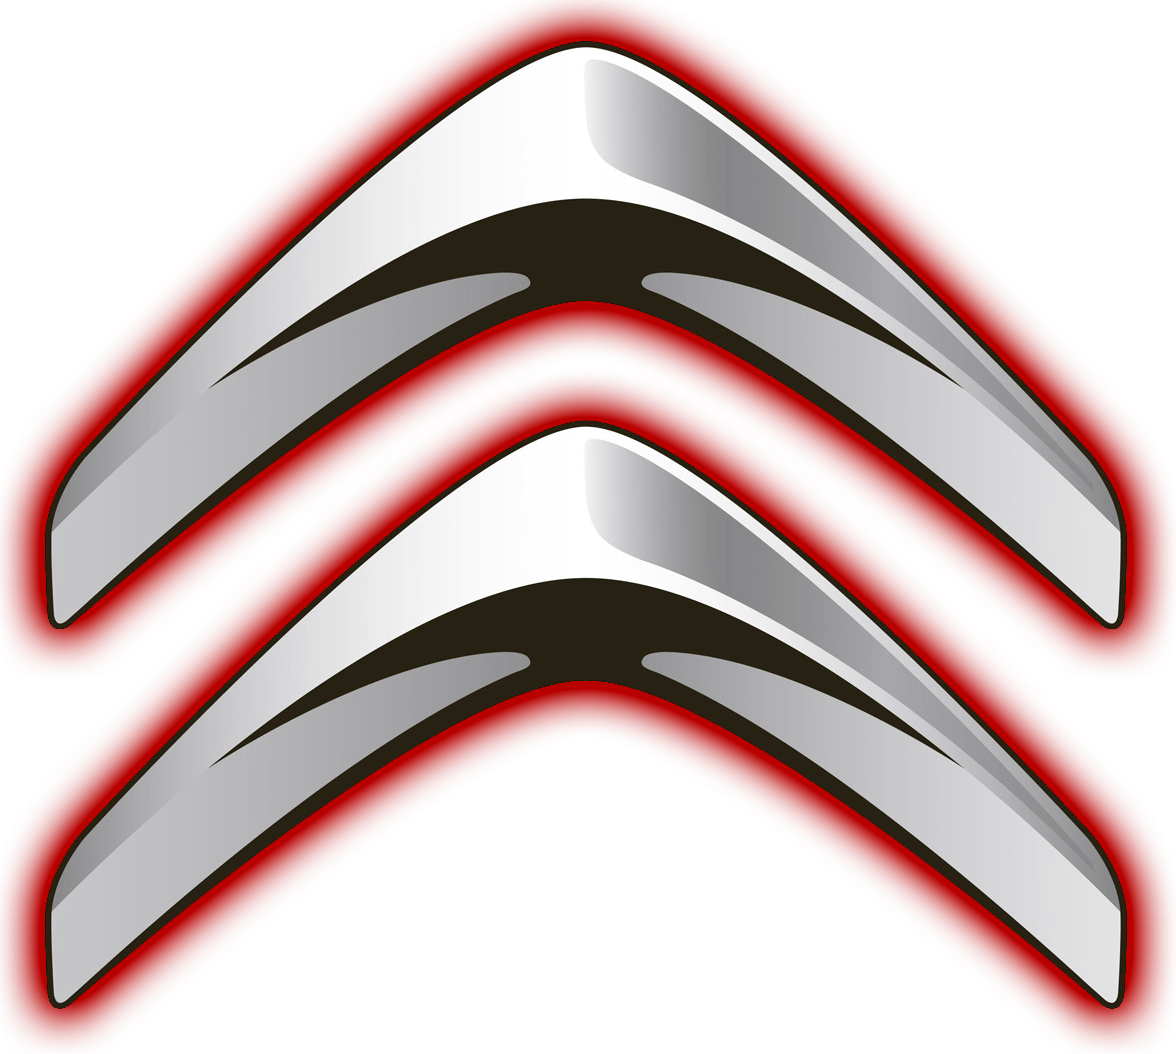 Citroen Logo - Citroen Logo, Citroen Car Symbol Meaning and History. Car Brand